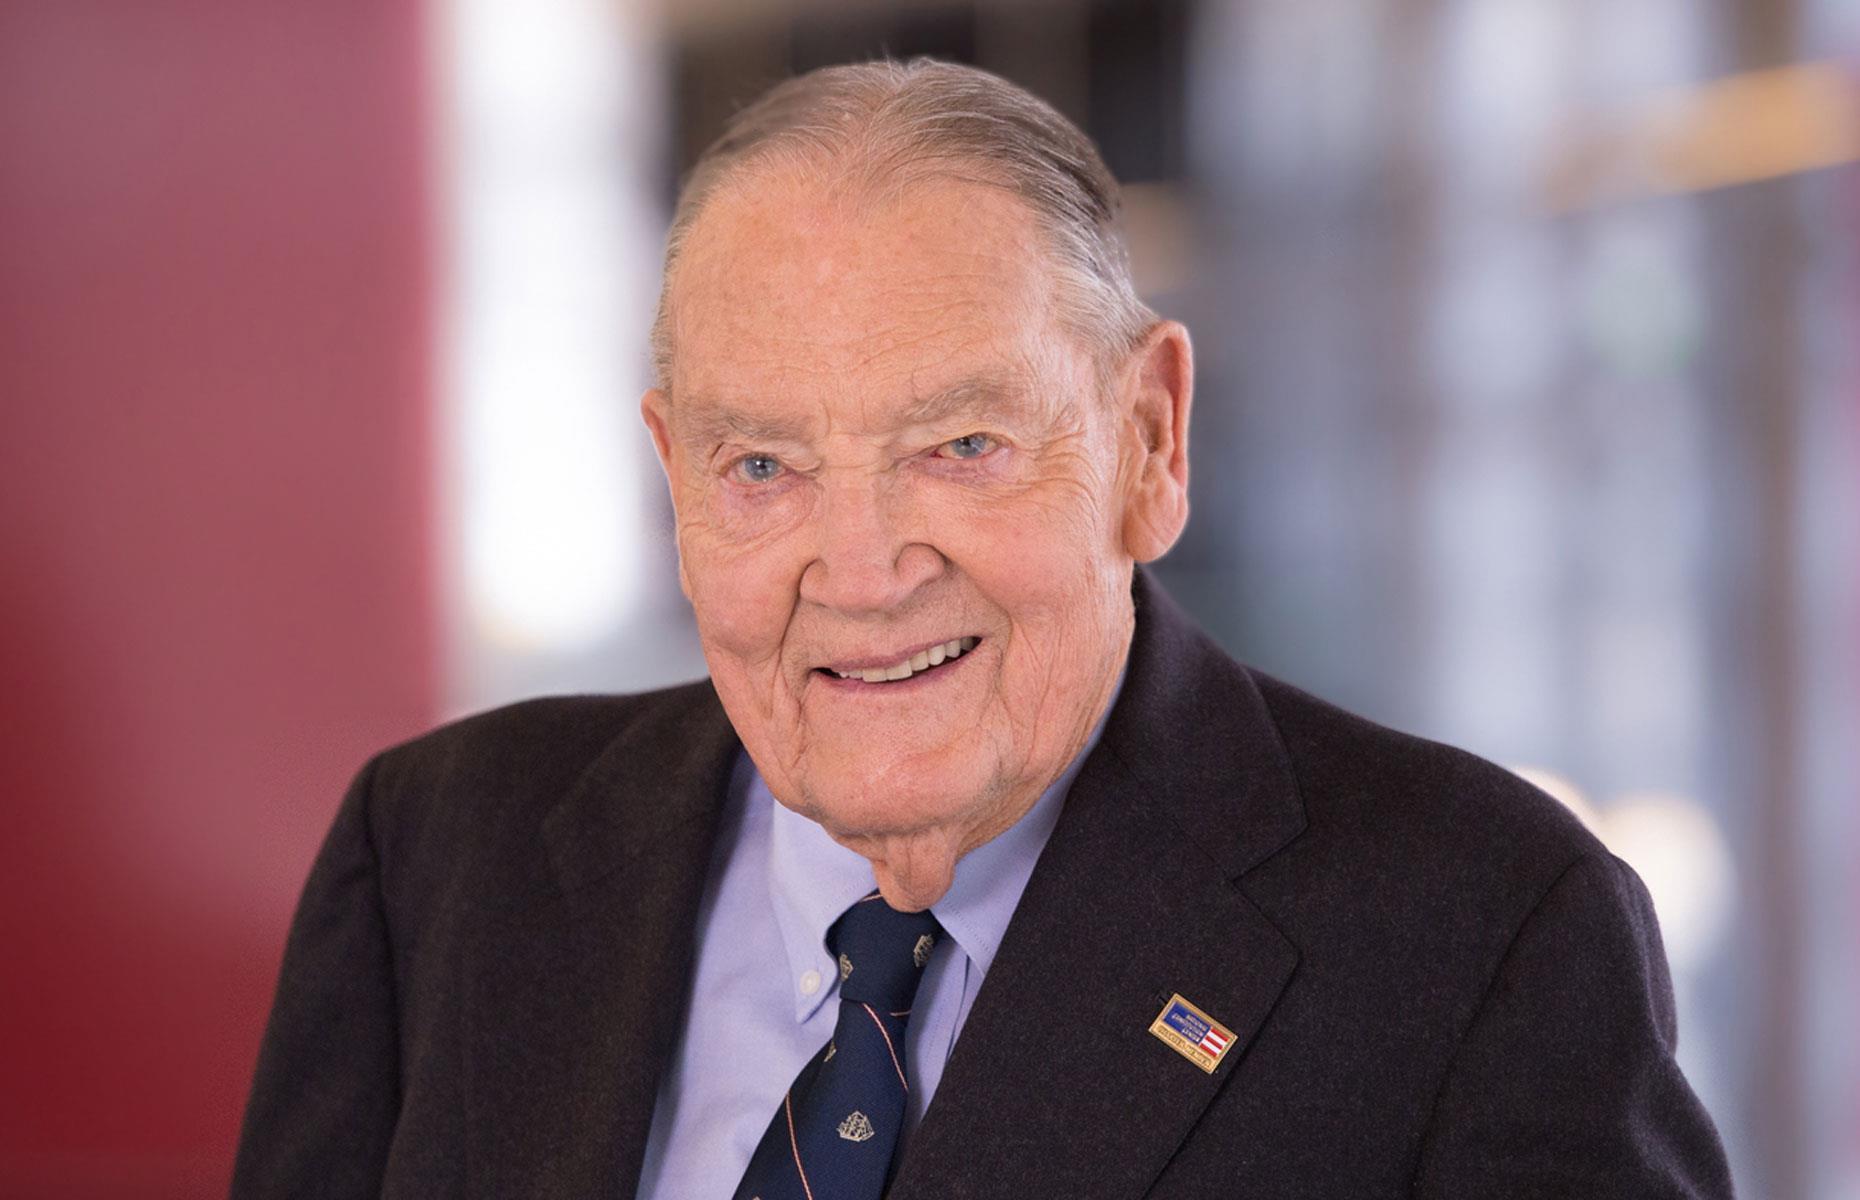 John Bogle – downsizing when the time is right can save you a fortune